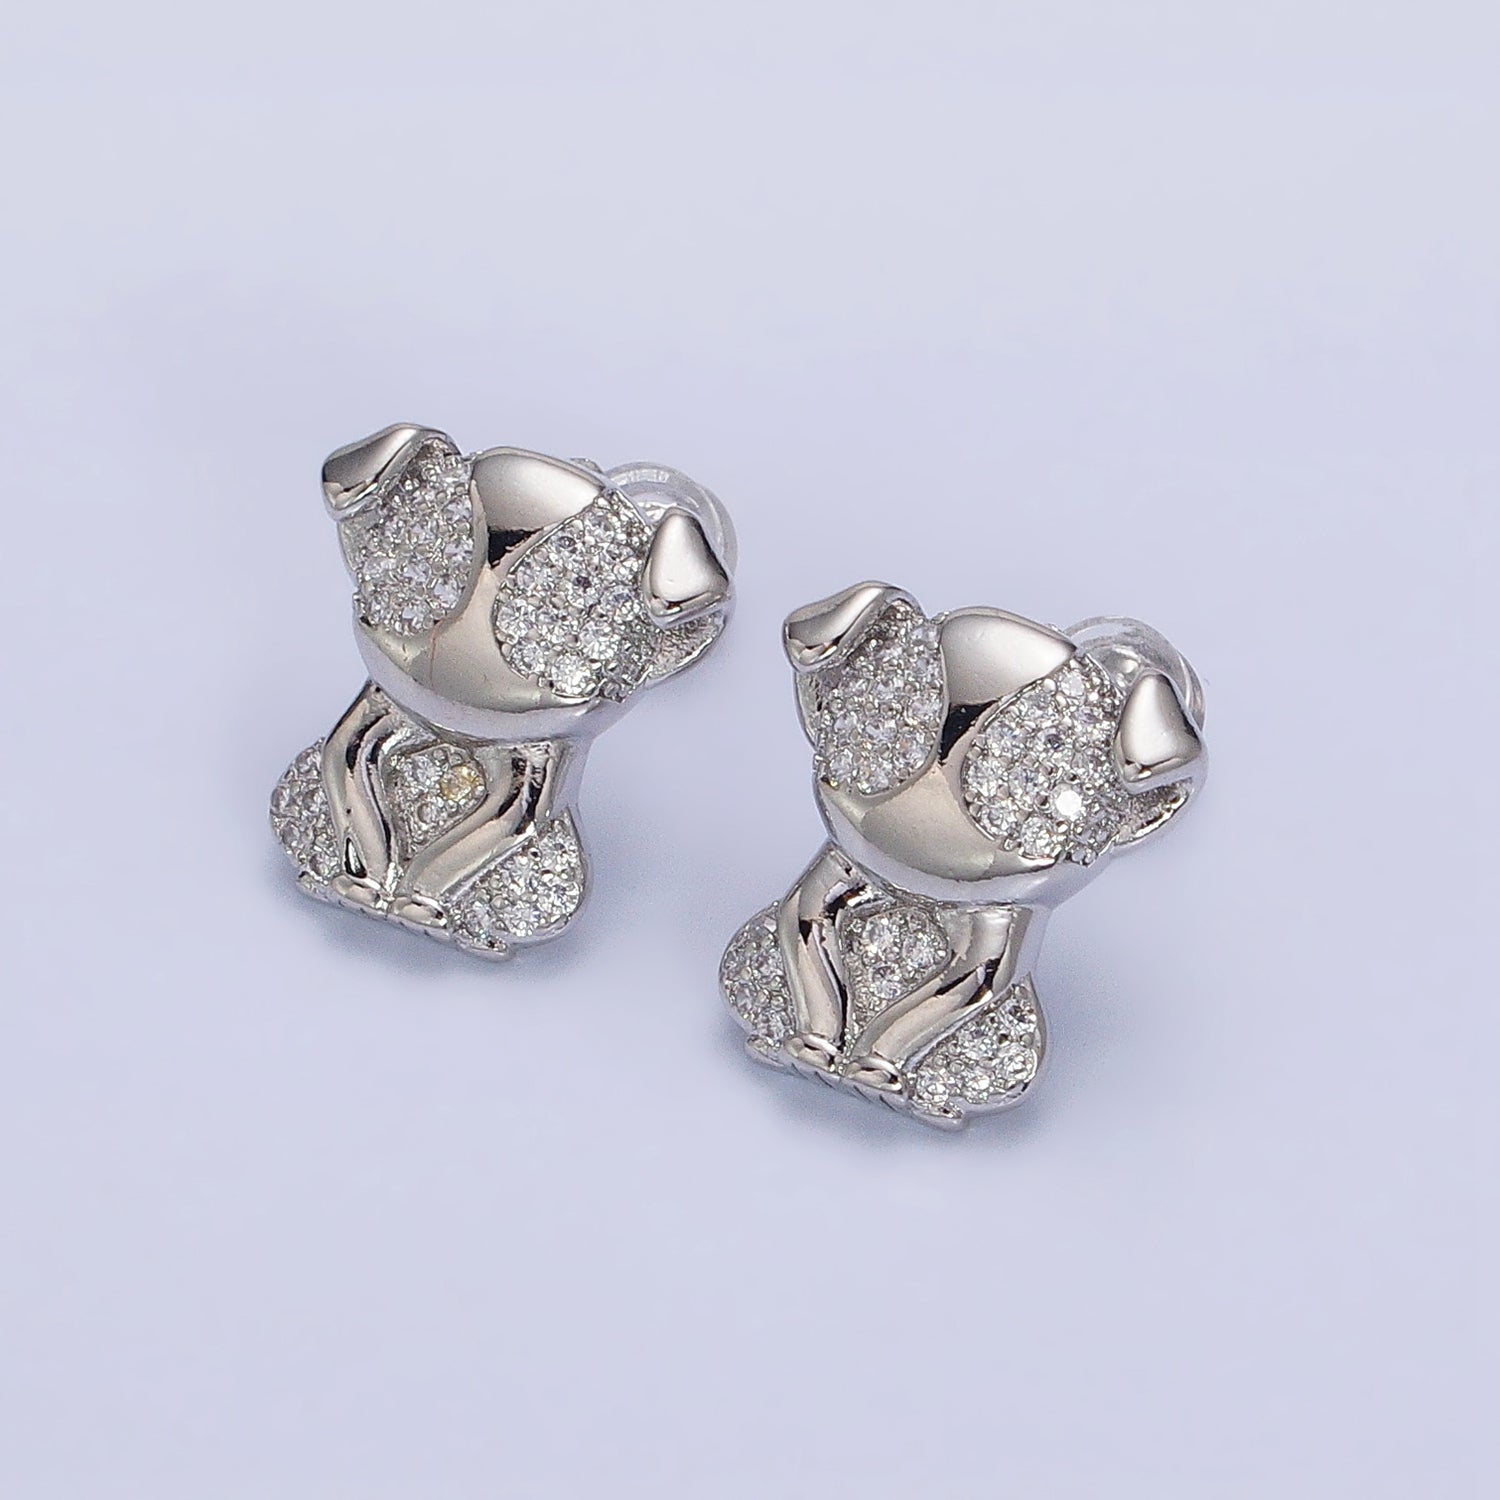 16K Gold Filled Sitting Puppy Dog Micro Paved CZ Stud Earrings in Gold & Silver | AB631 AB632